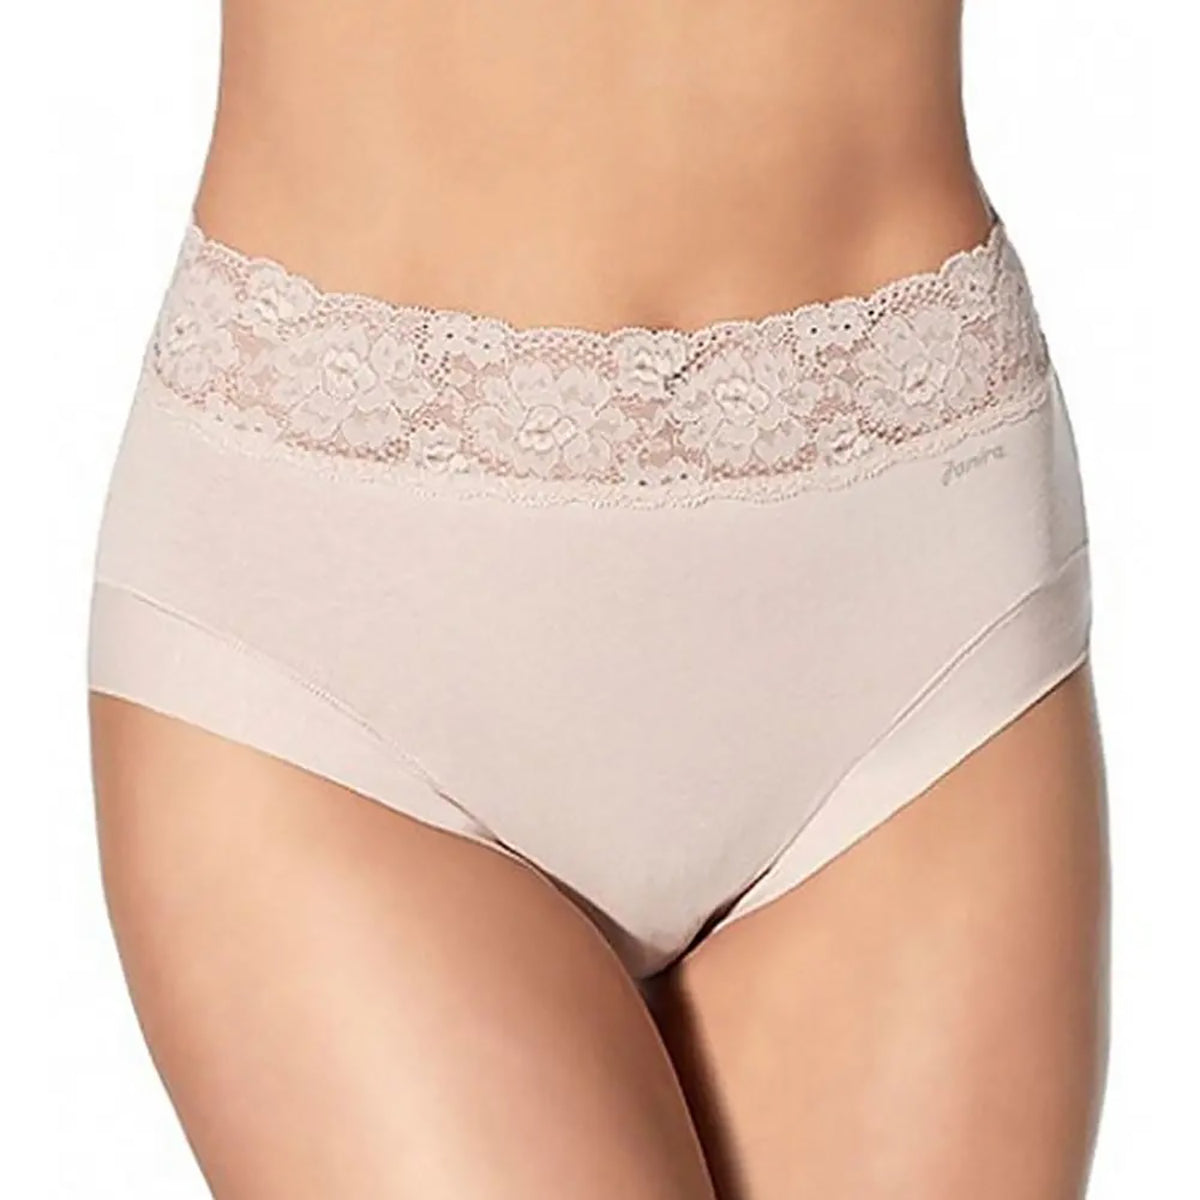 Sloggi Romance Maxi Women's High Lace Midi Briefs (Triumph) buy at best  prices with international delivery in the catalog of the online store of  lingerie